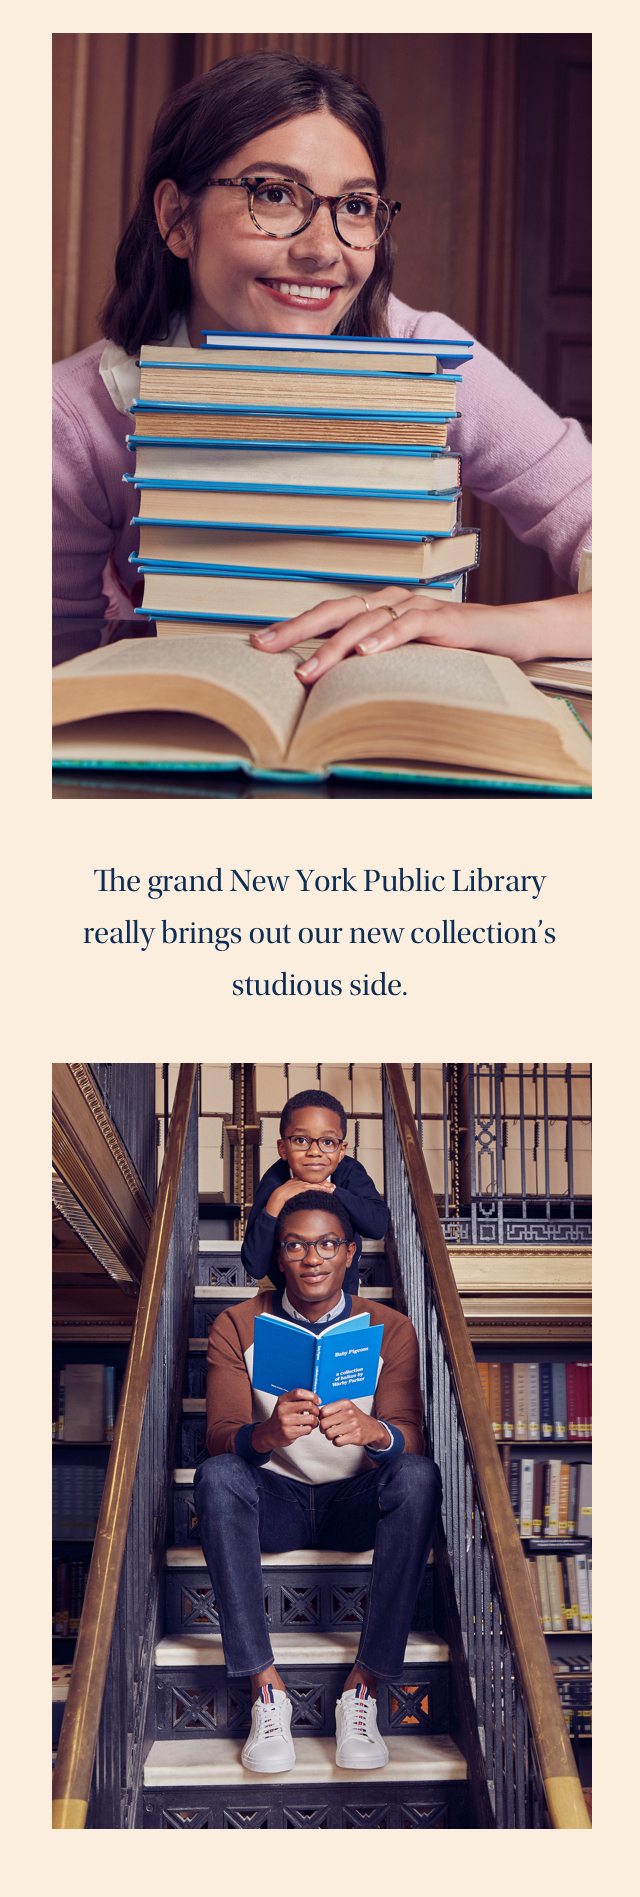 The grand New York Public Library really brings out our new collection’s studious side.